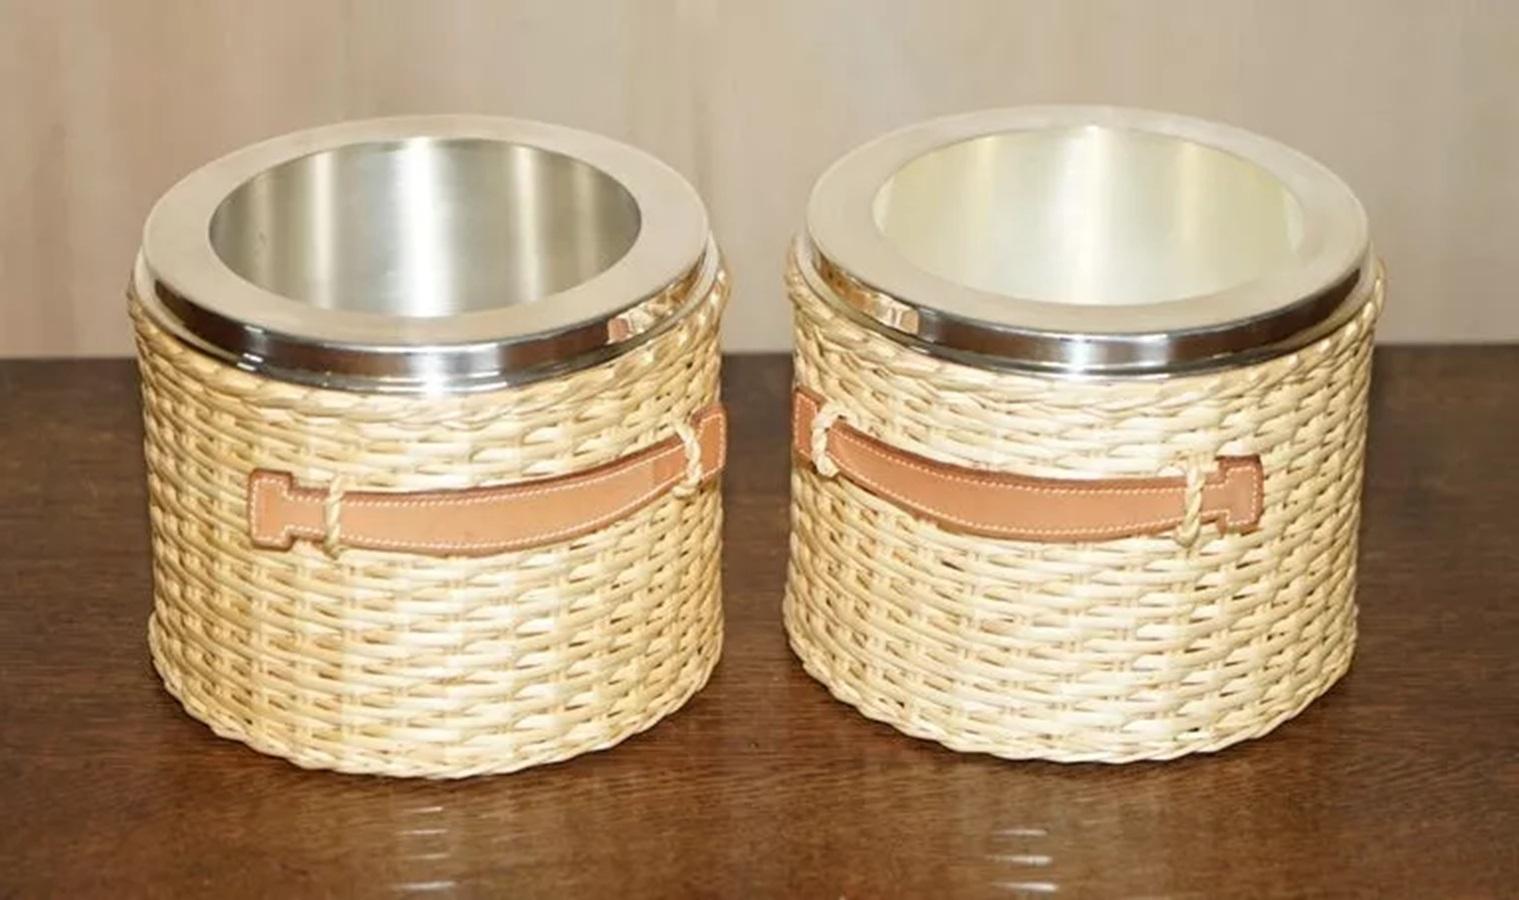 Royal House Antiques

Royal House Antiques is delighted to offer for sale this custom made pair of Champagne Buckets which are part of a suite of Hermes Paris “Farming” Kelly picnic equipment, Barenia Edition, custom made to order for Lady Victoria